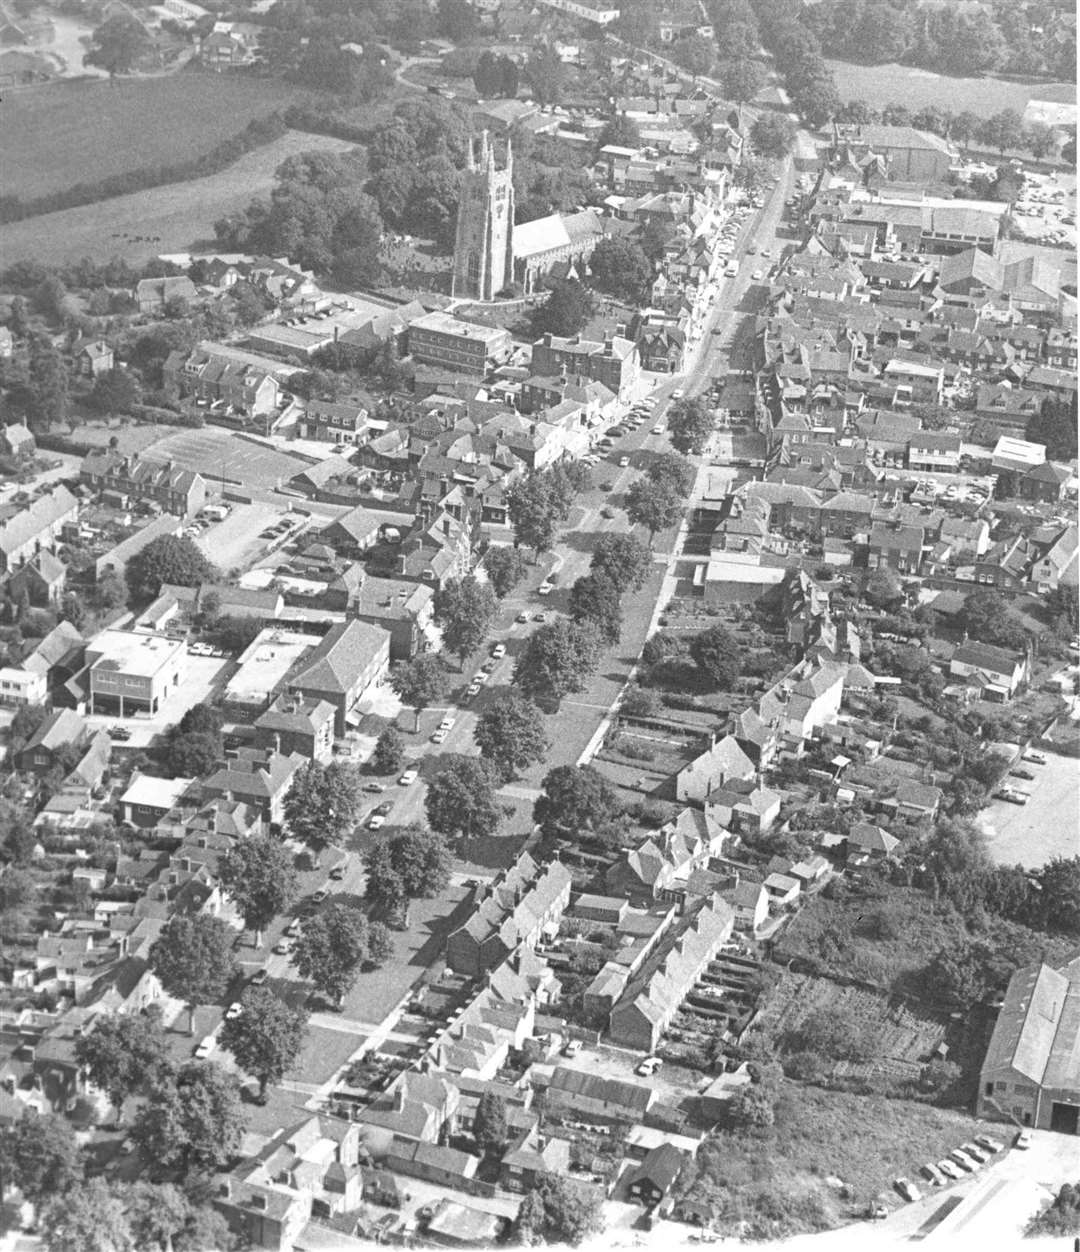 Tenterden high street pictured from above 41 years ago, in 1980